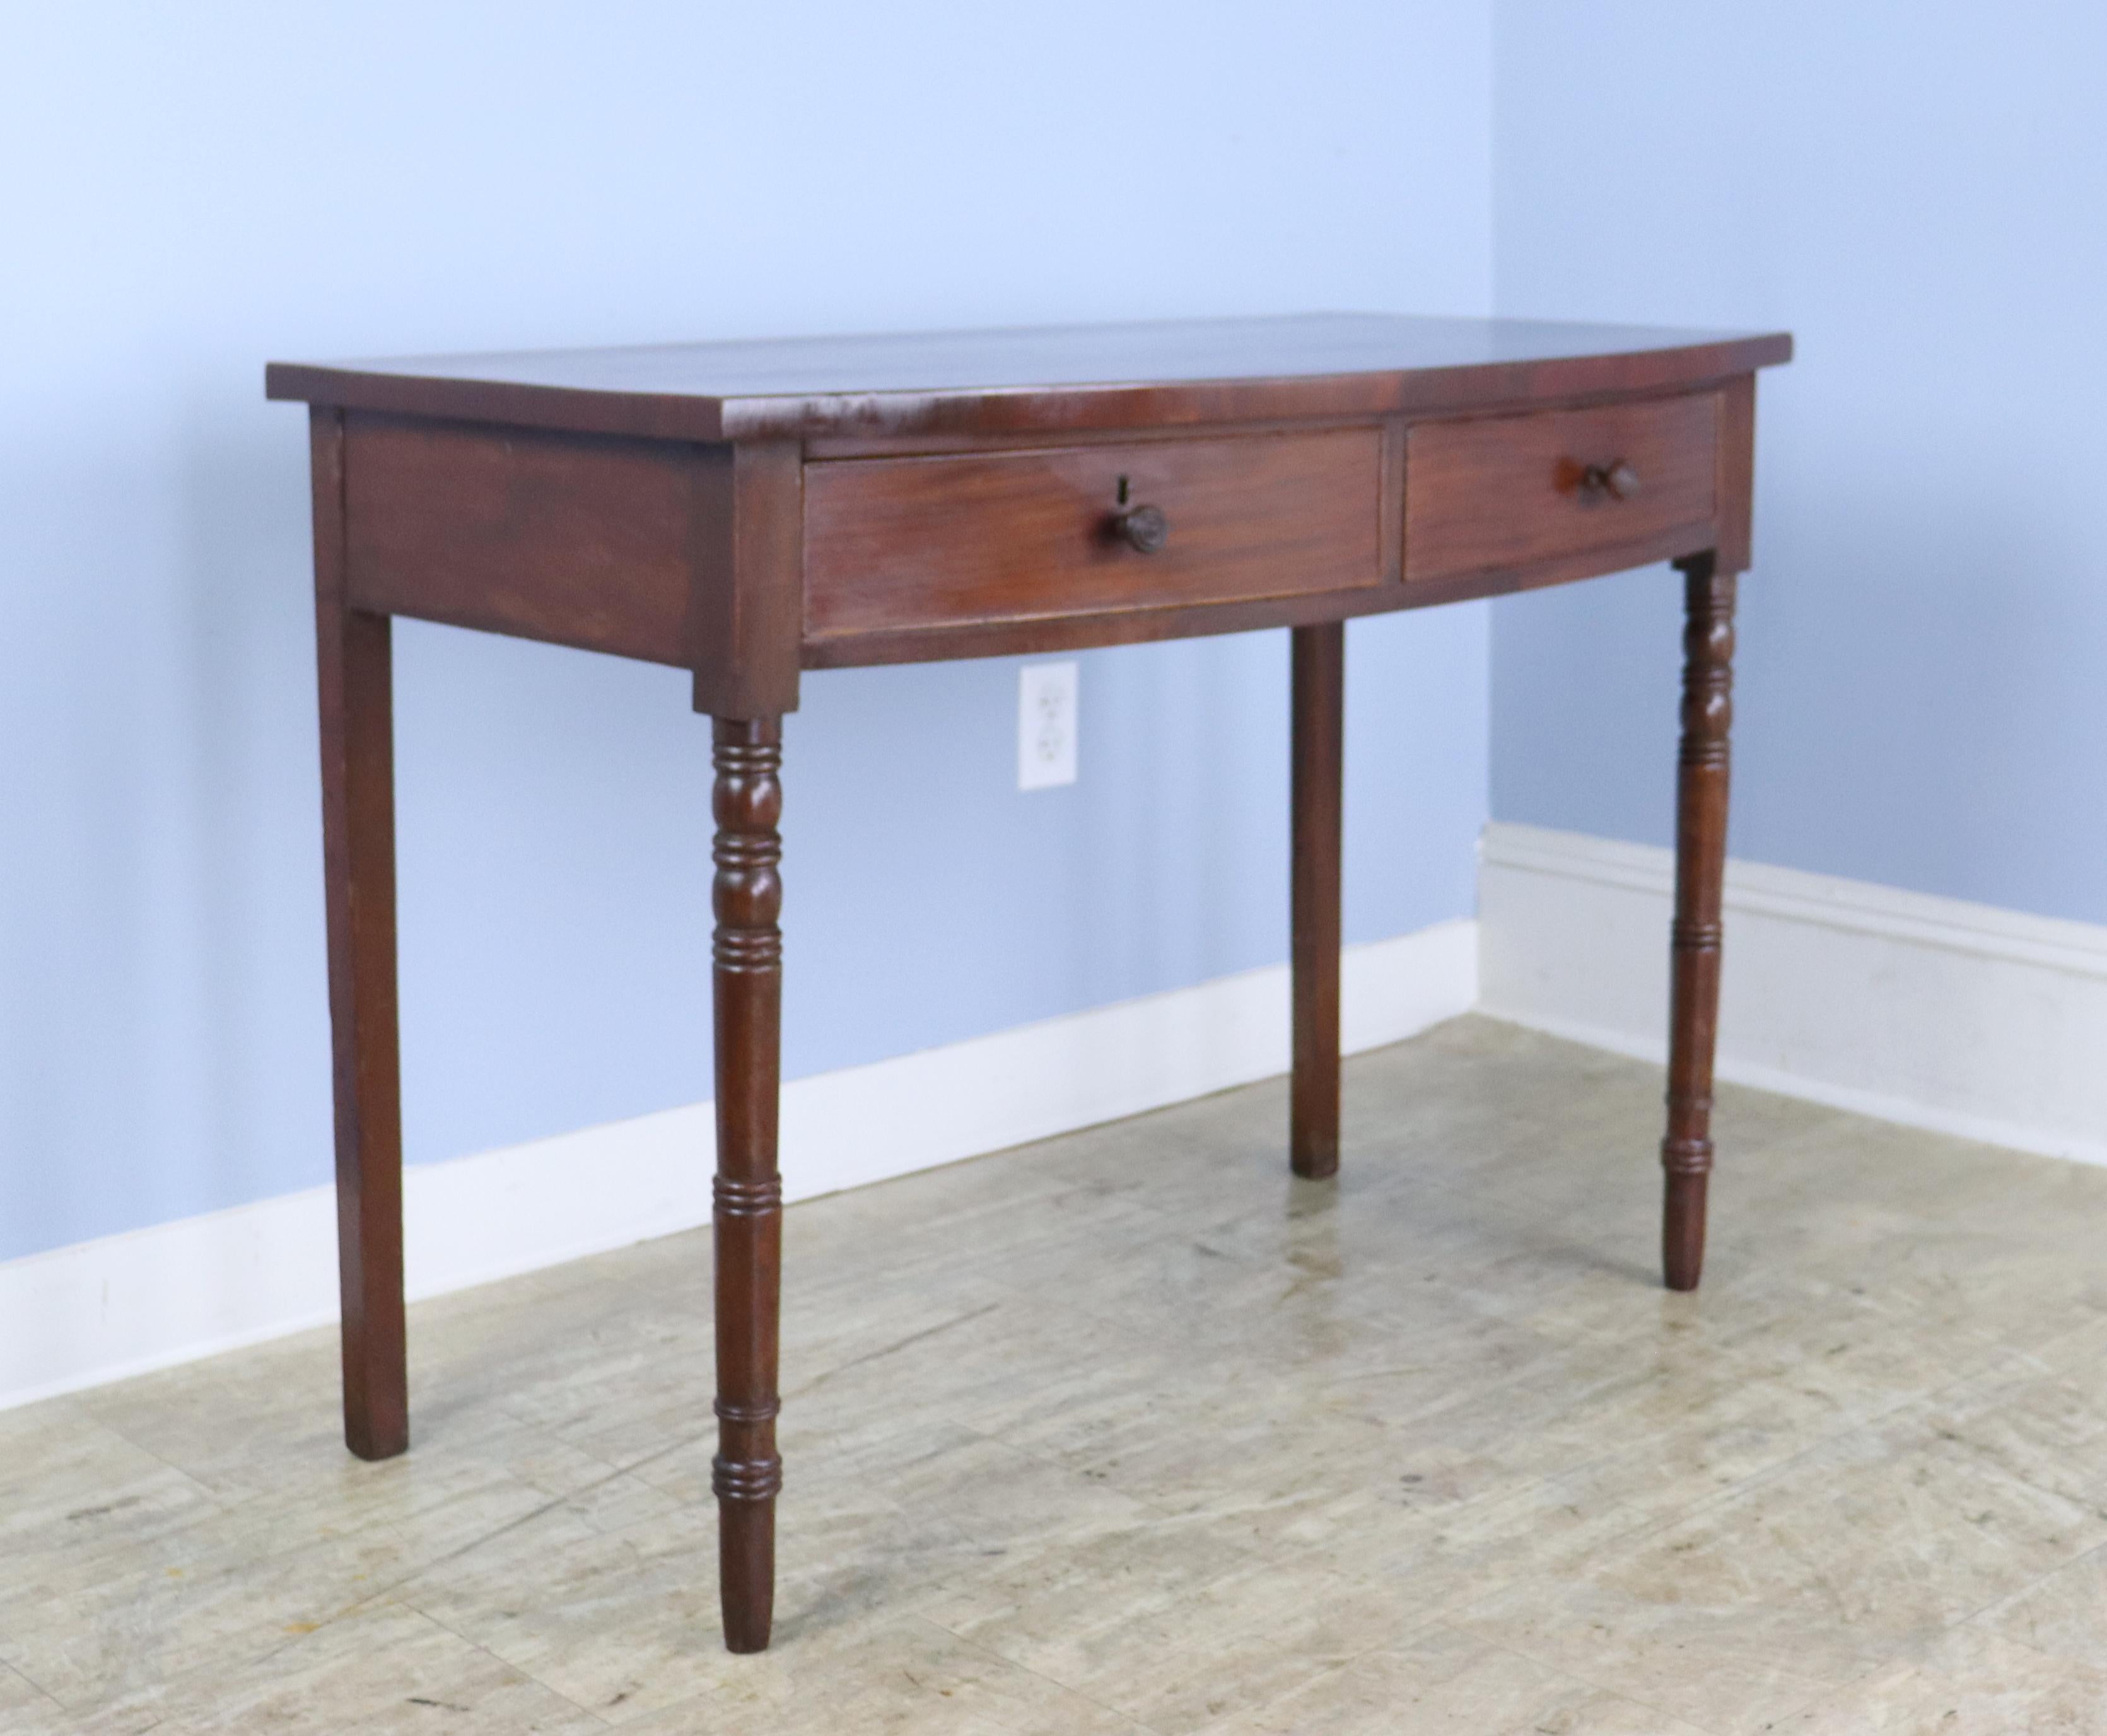 A refined late Georgian serving table or desk in warm mahogany with delicate satinwood stringing around the top.  The two drawers close snugly and are in good condition, having retained their delicate cockbeading.  The slim turned legs complete the